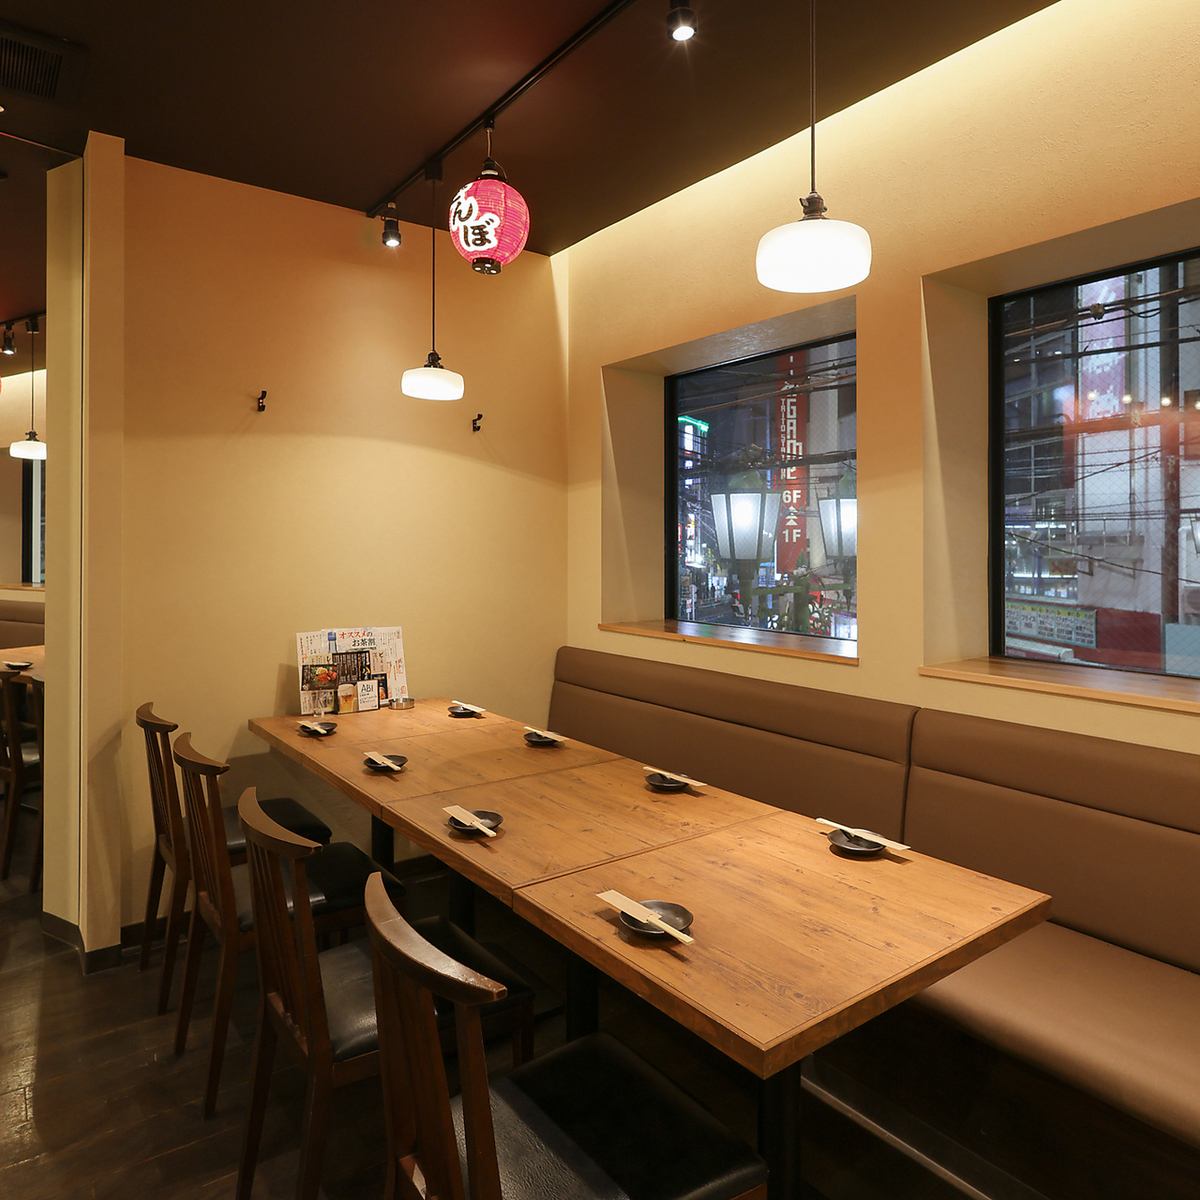 Enjoy our carefully selected chicken dishes in a stylish and relaxing space!